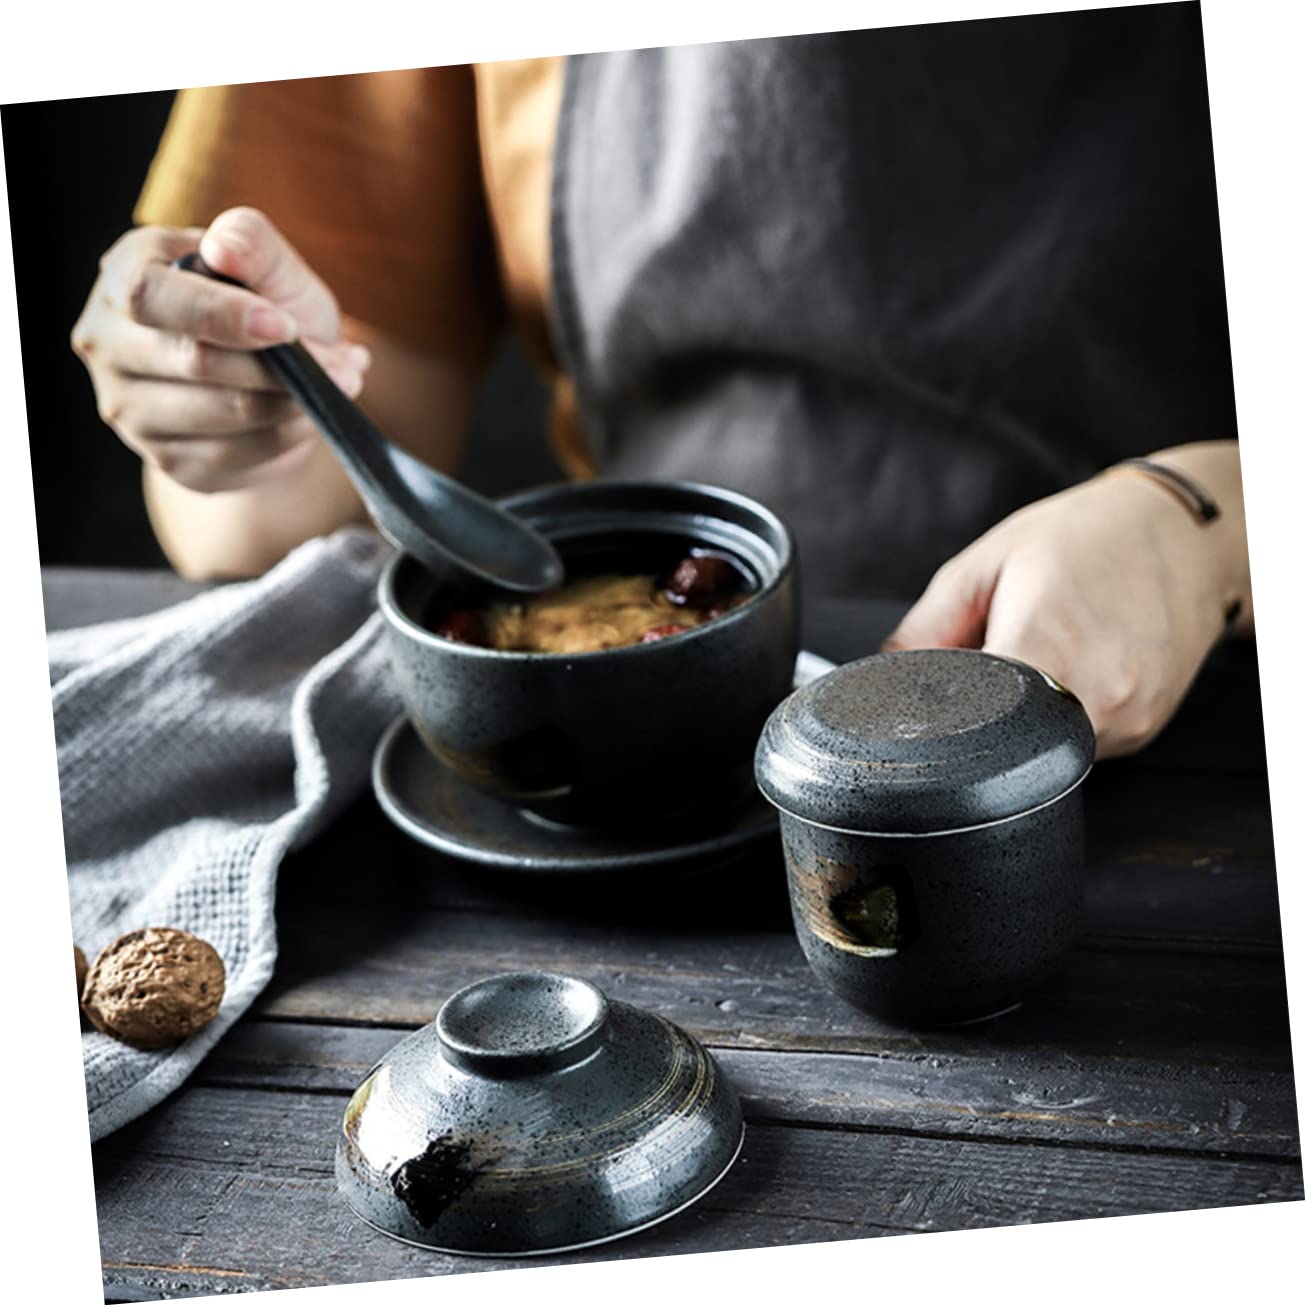 Anneome 2pcs Stew Home Egg Bowl Dessert Steam Noodle Ceramic Nest Stainless Cuisine Japanese Household Restaurant Custard Onion Tableware Lid Soup with Ml Pudding Steaming Cup Rice French